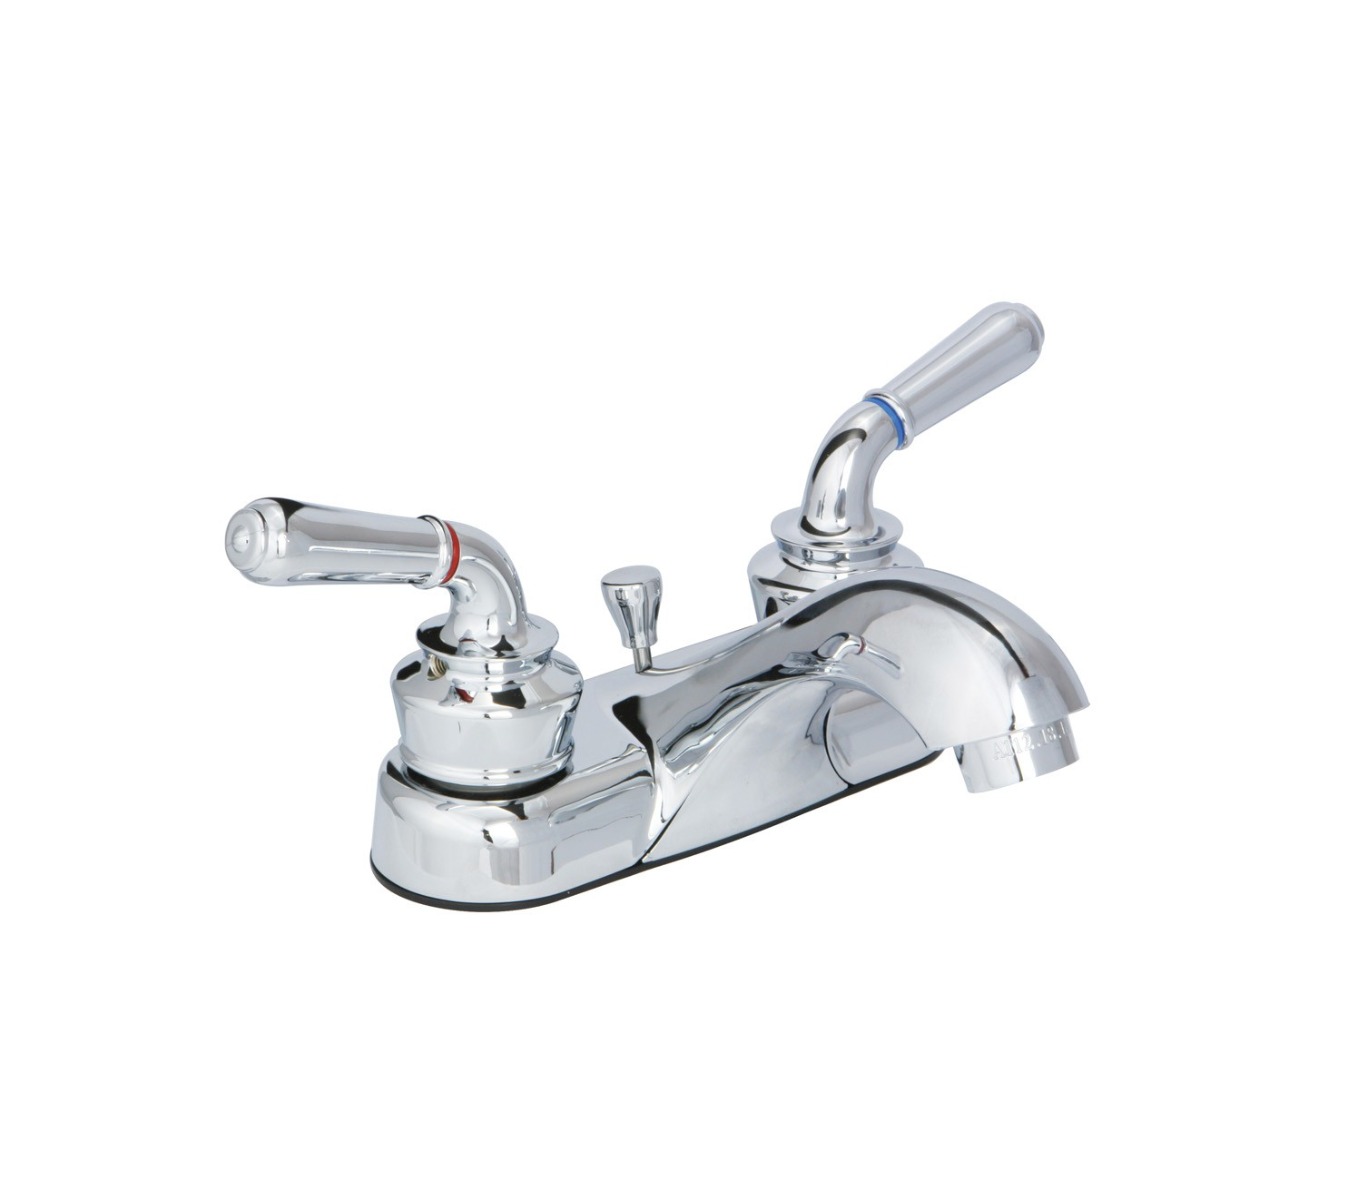 Cypress center set faucet with 50-50 pop-up assembly